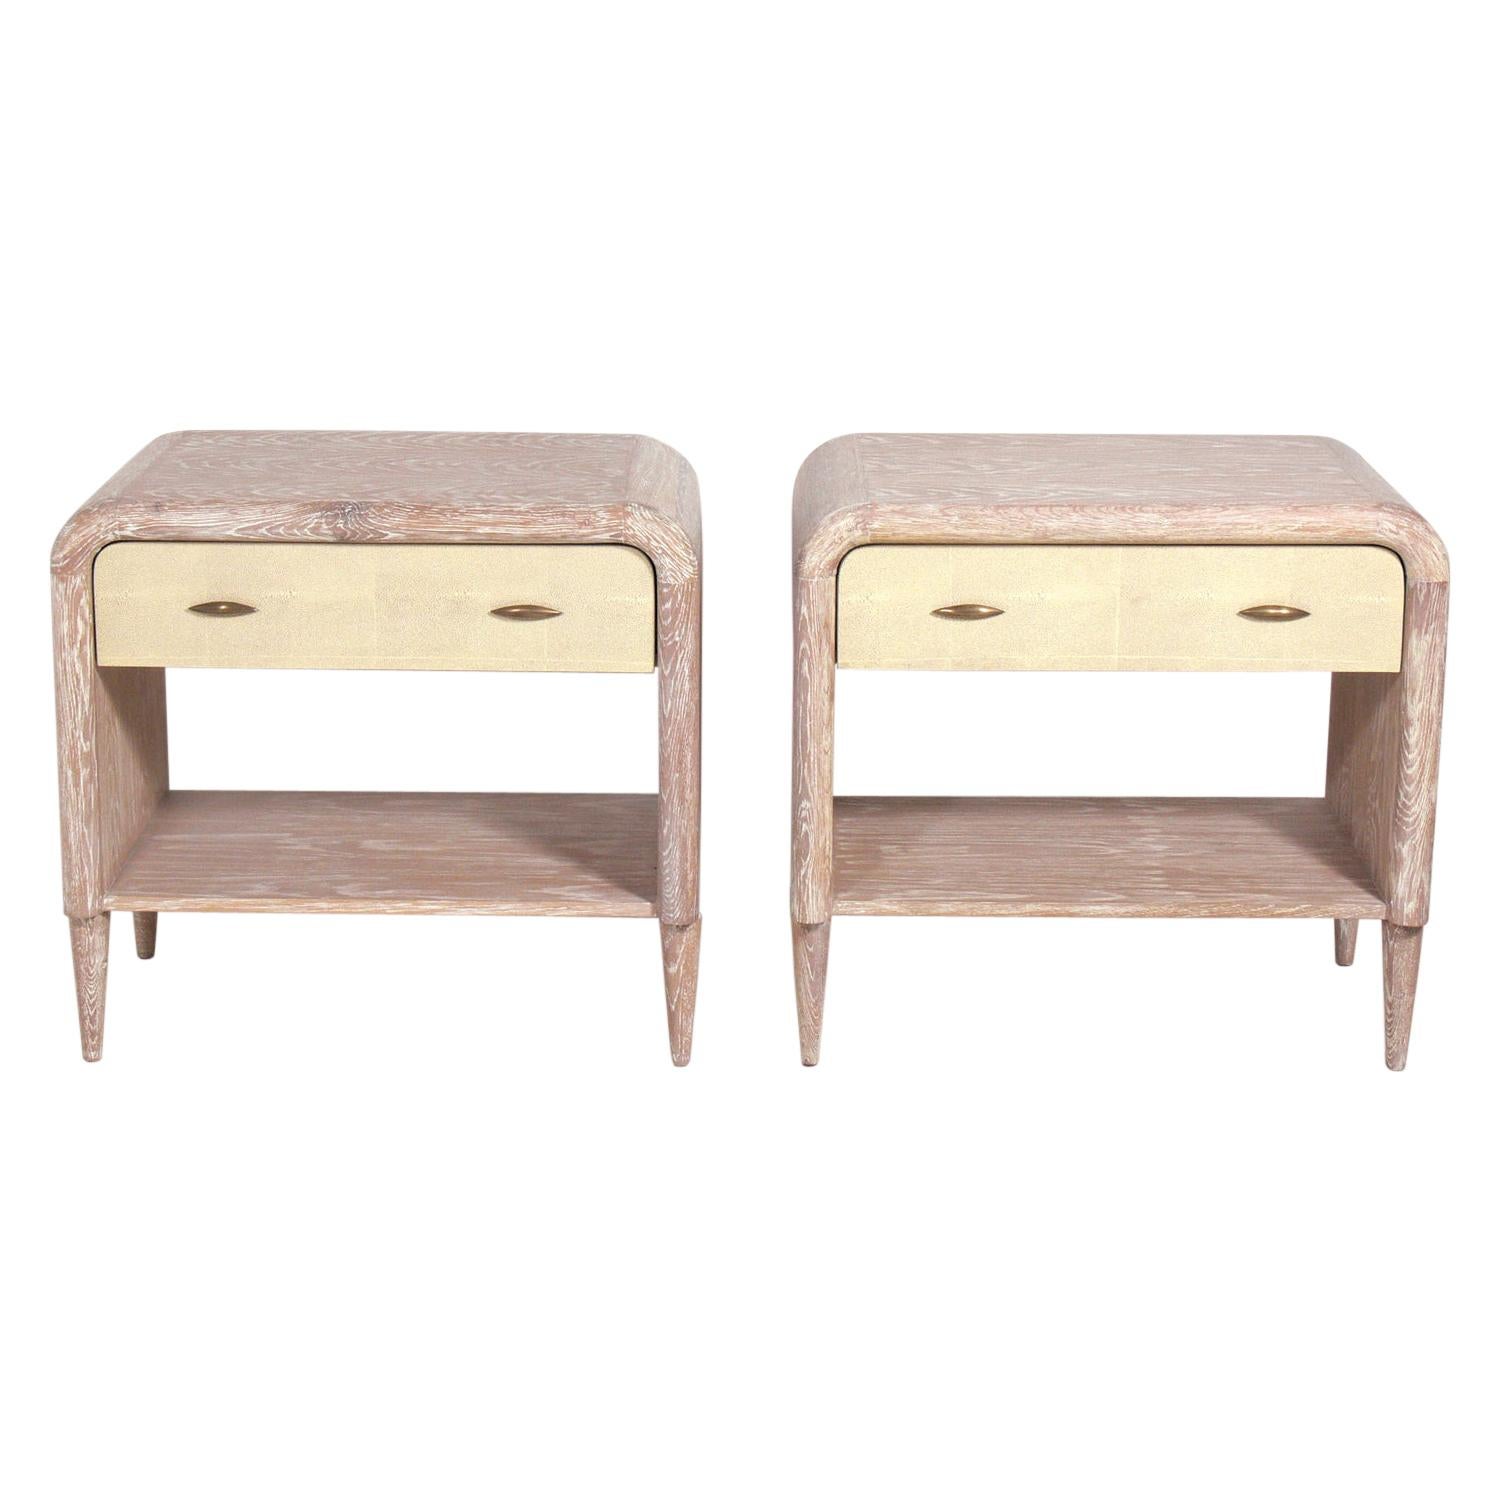 Pair of Limed Wood and Faux Shagreen Nightstands